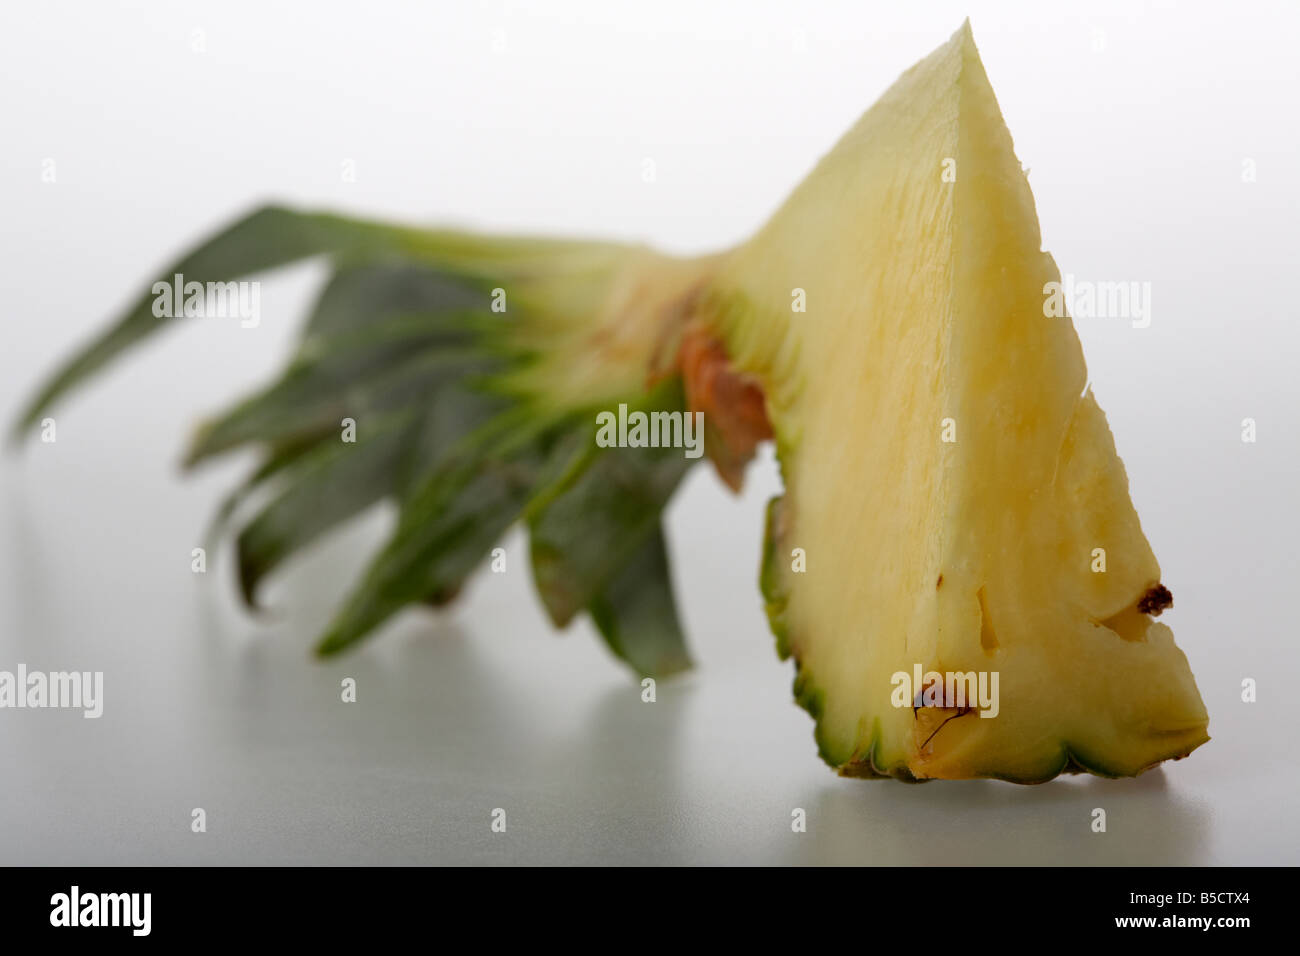 cut section of gold pineapple Stock Photo